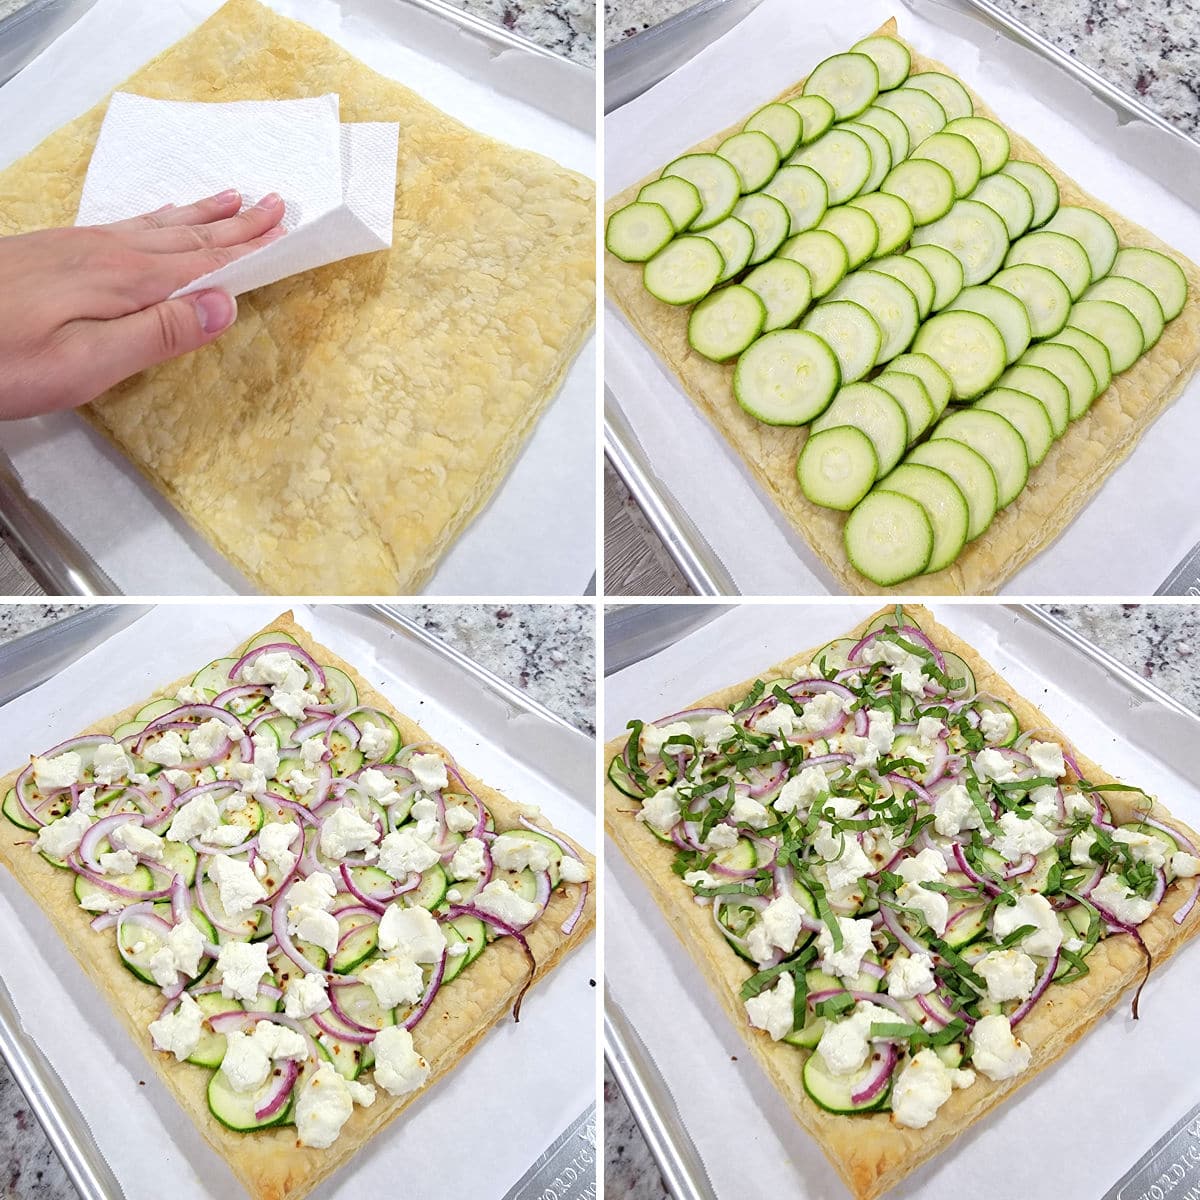 A collage showing the assembly of a puff pastry tart with toppings.